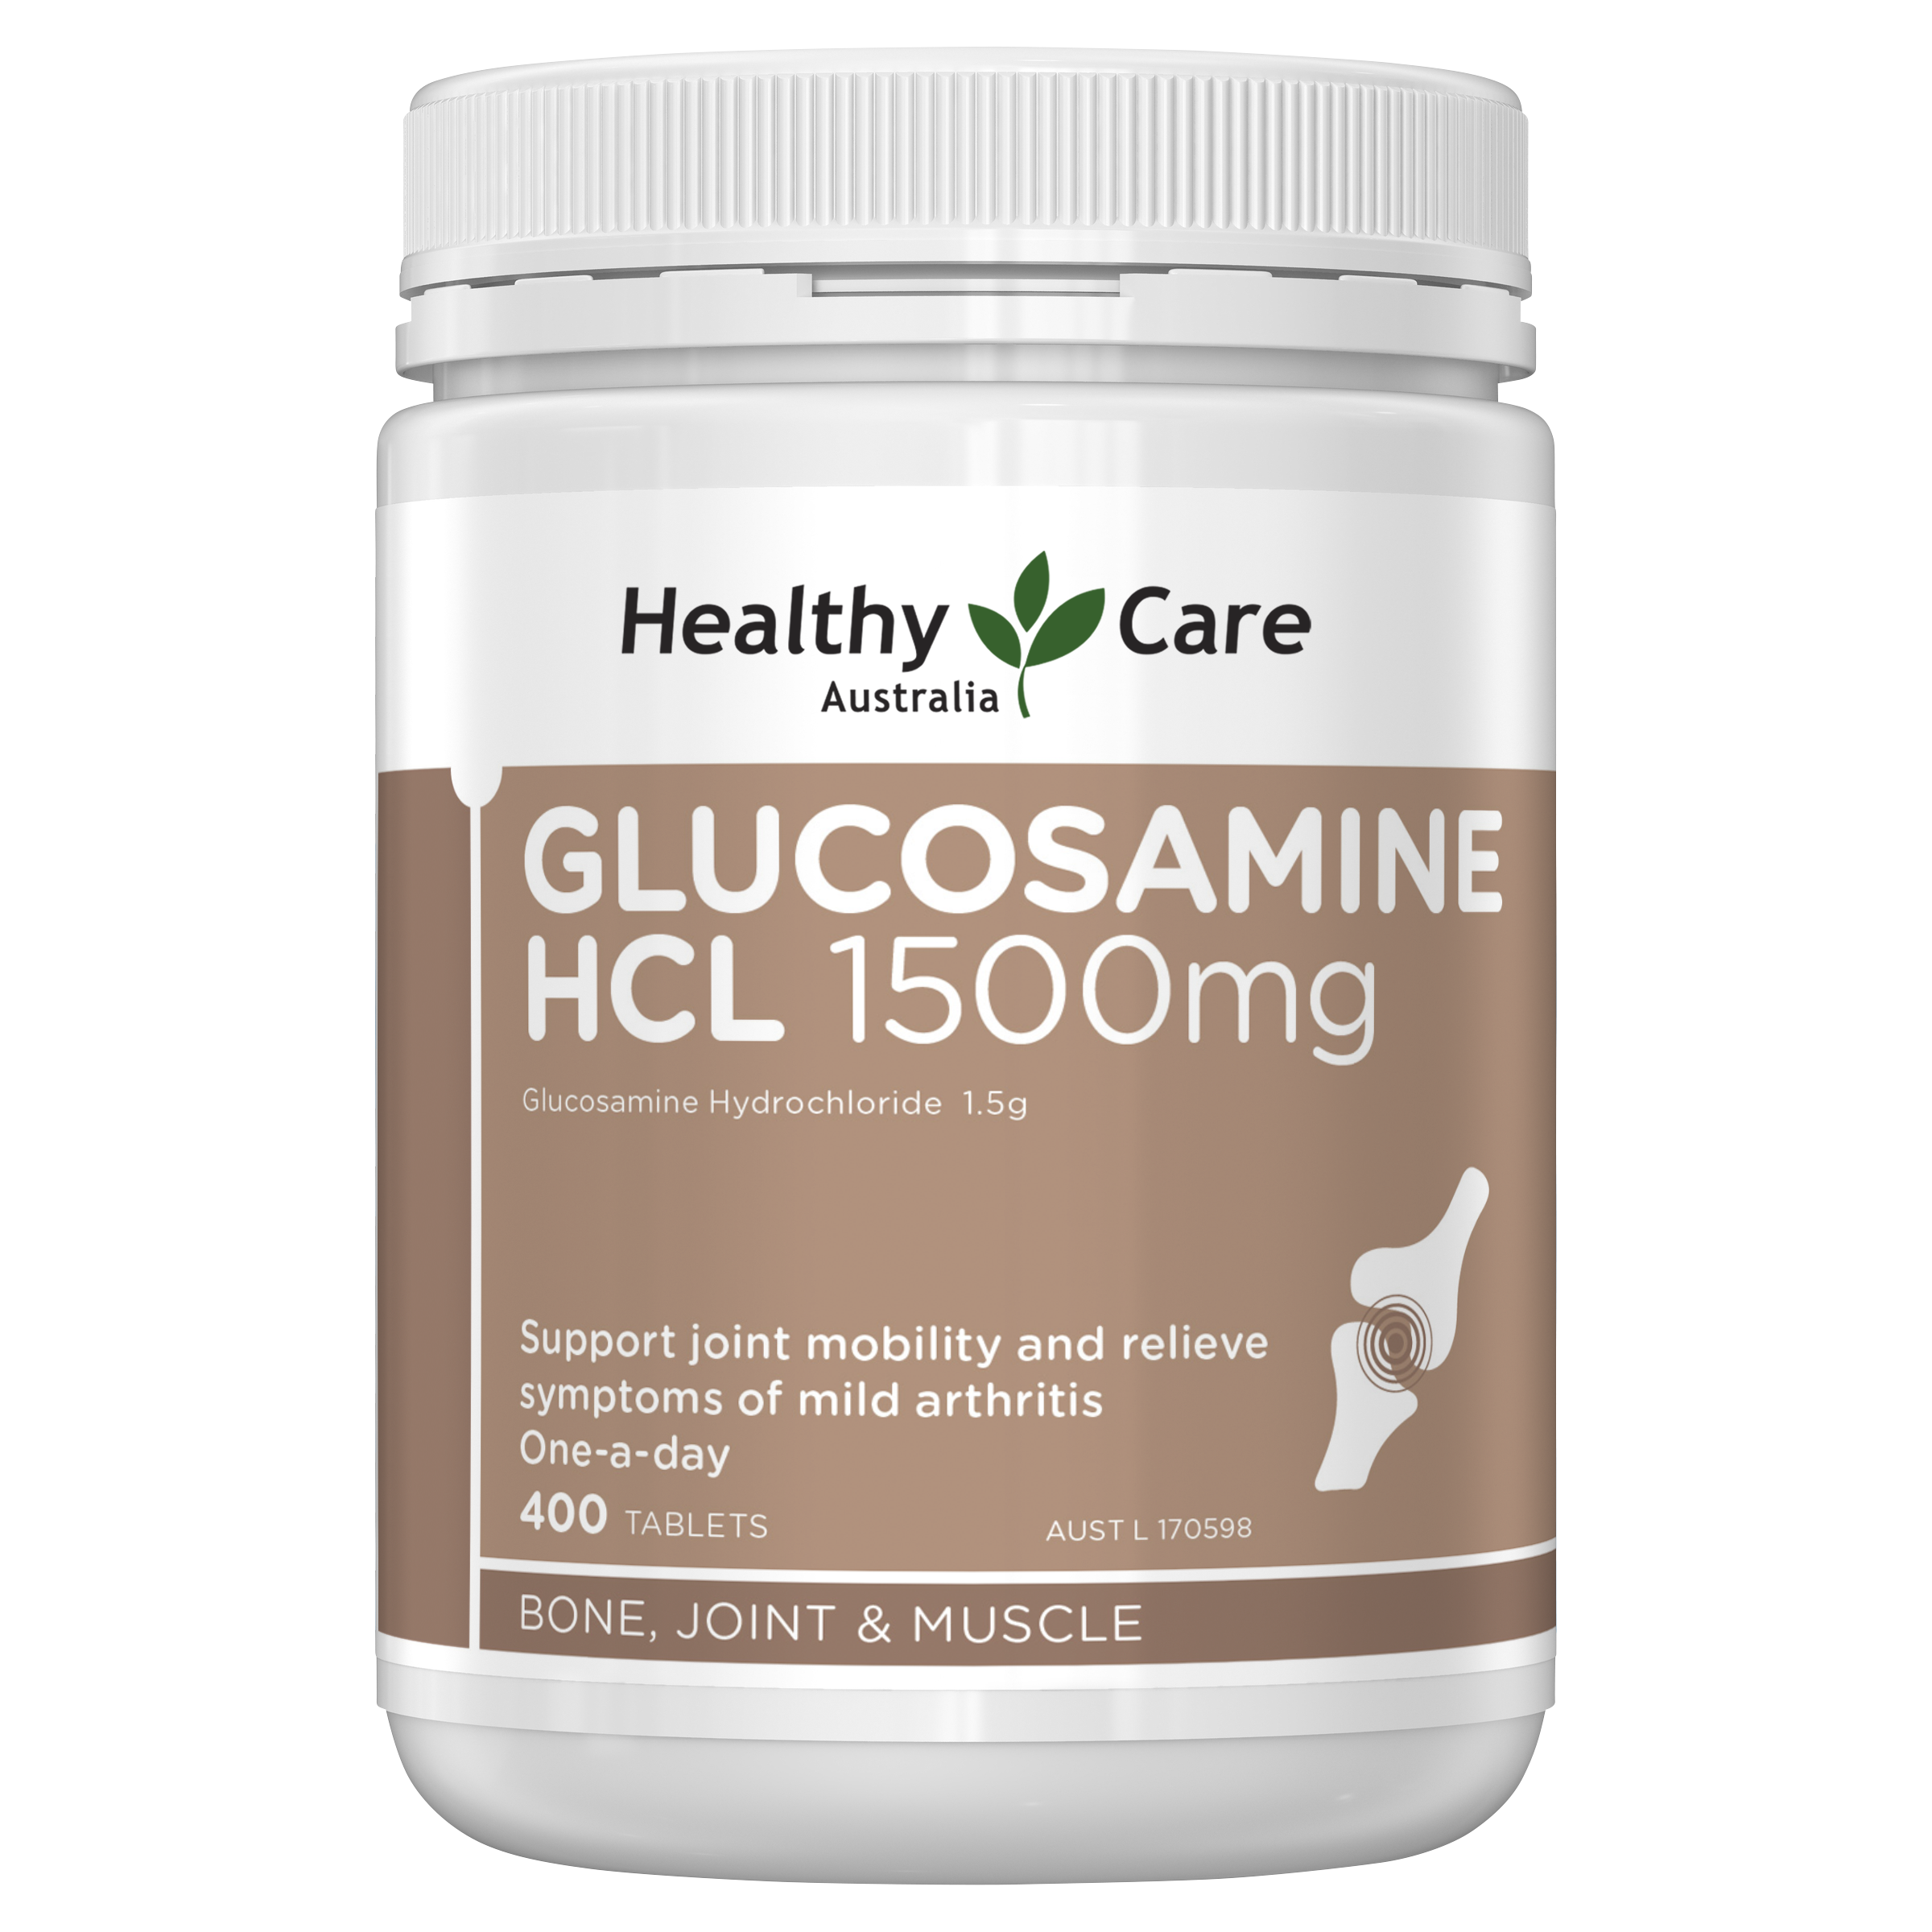 Healthy Care Glucosamine HCL 1500mg - 400 Tablets